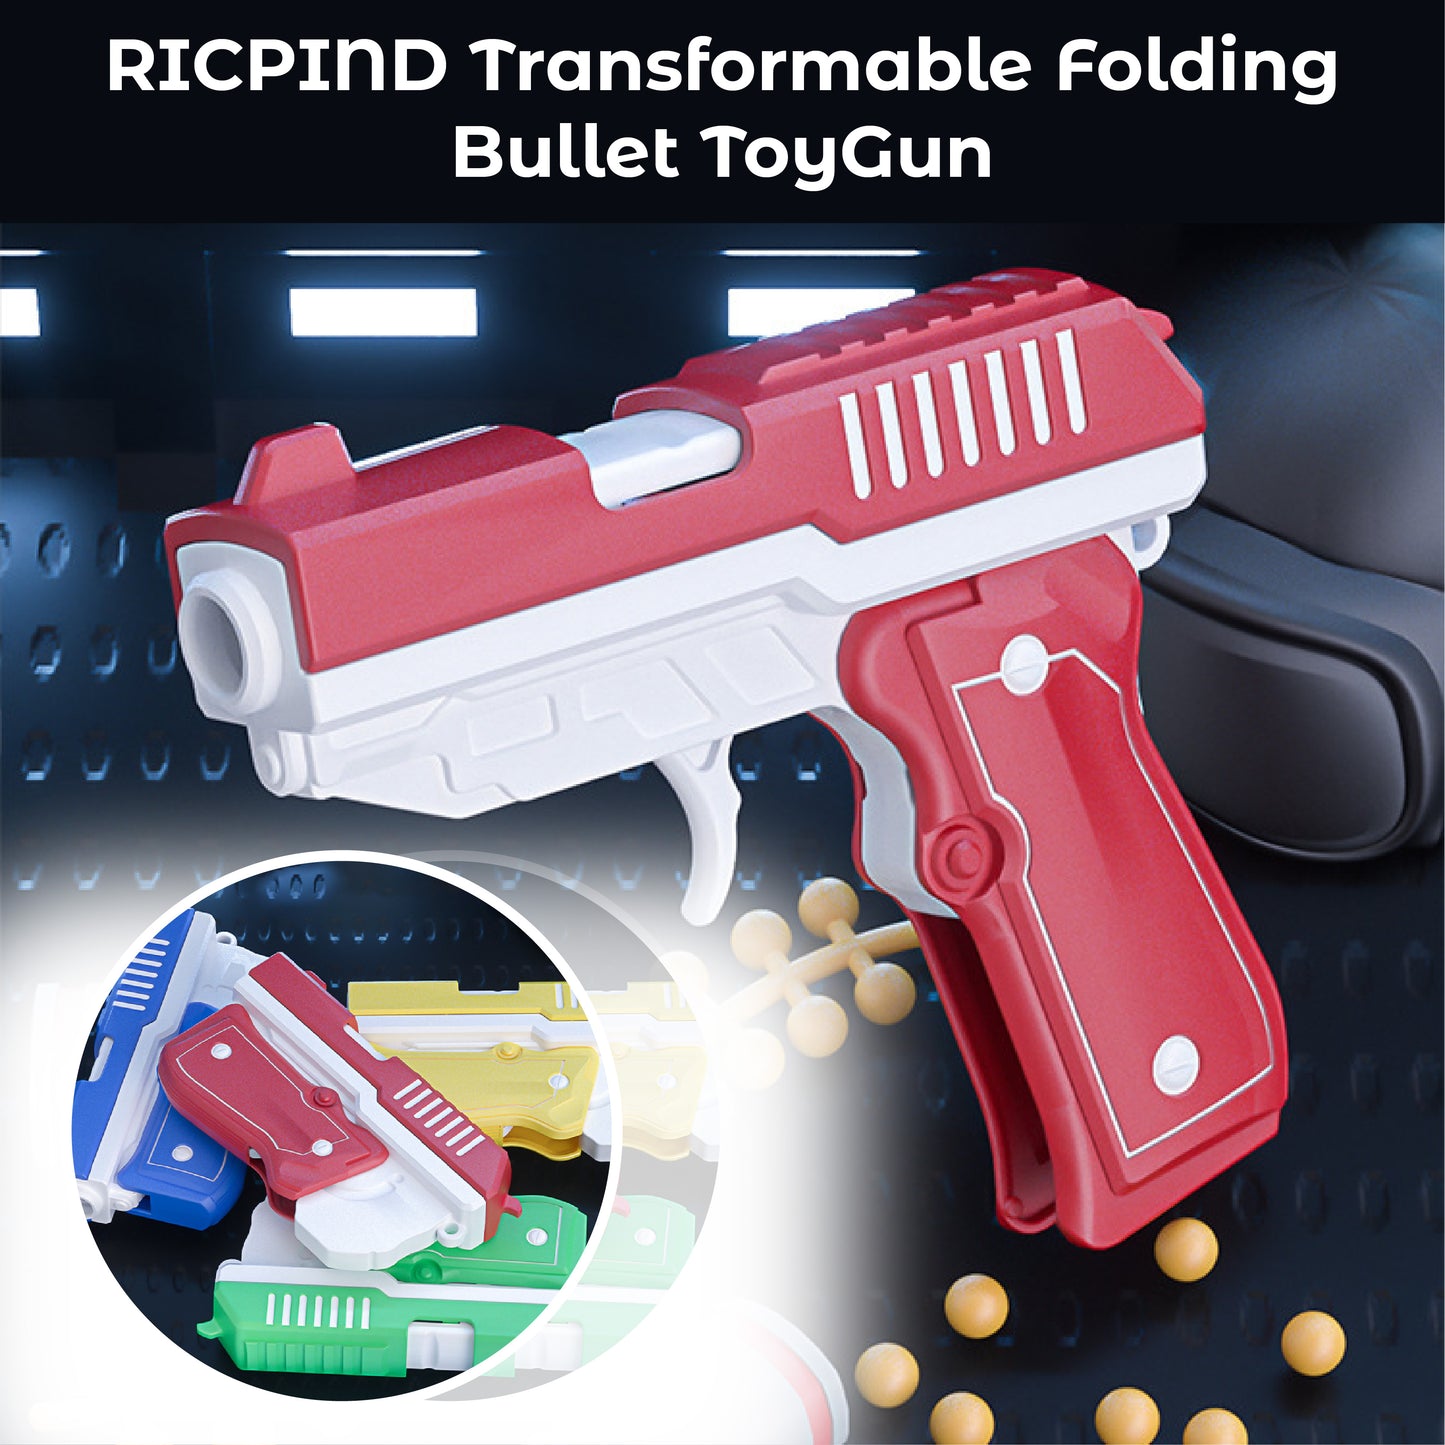 RICPIND Transformable Folding Bullet ToyGun